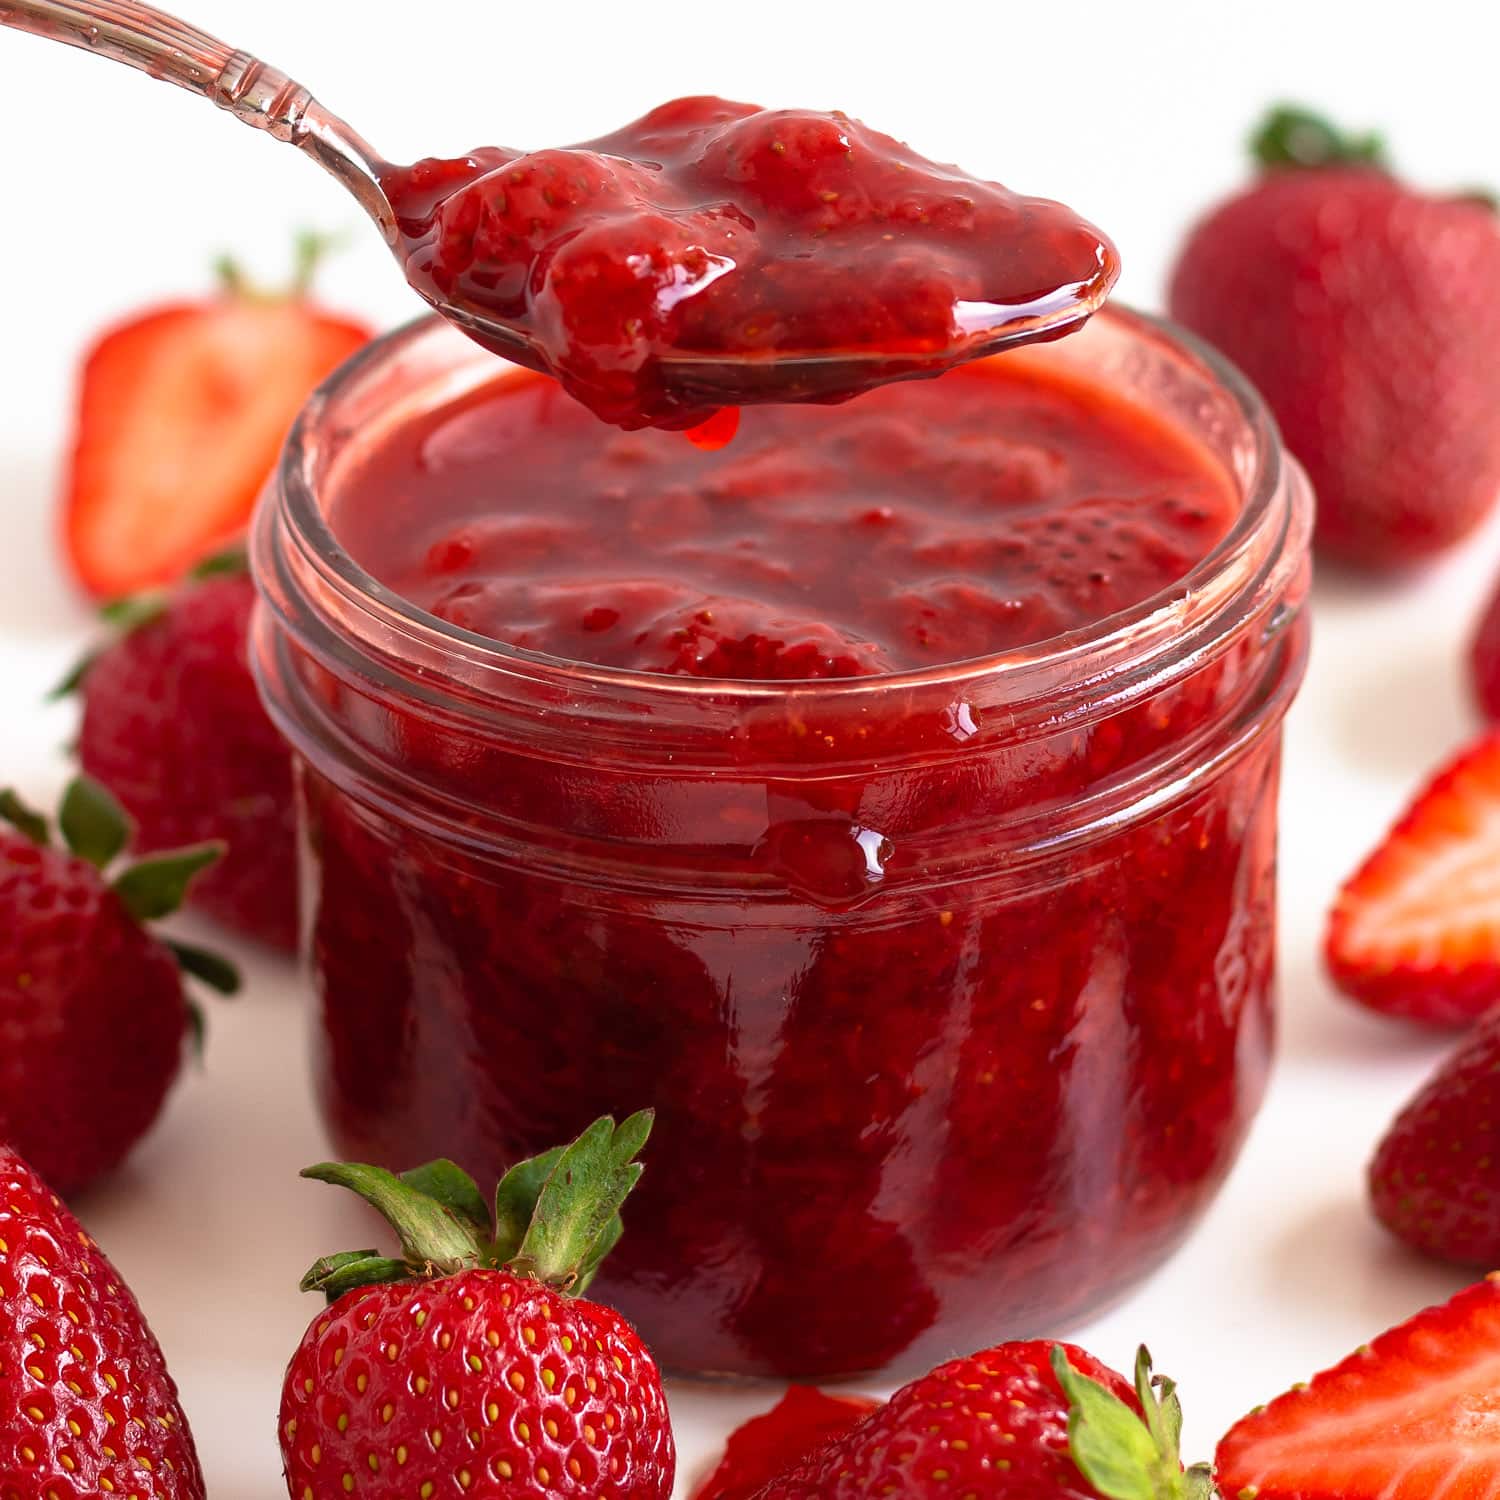 Homemade strawberry sauce in a jar with spoon scooping some out.